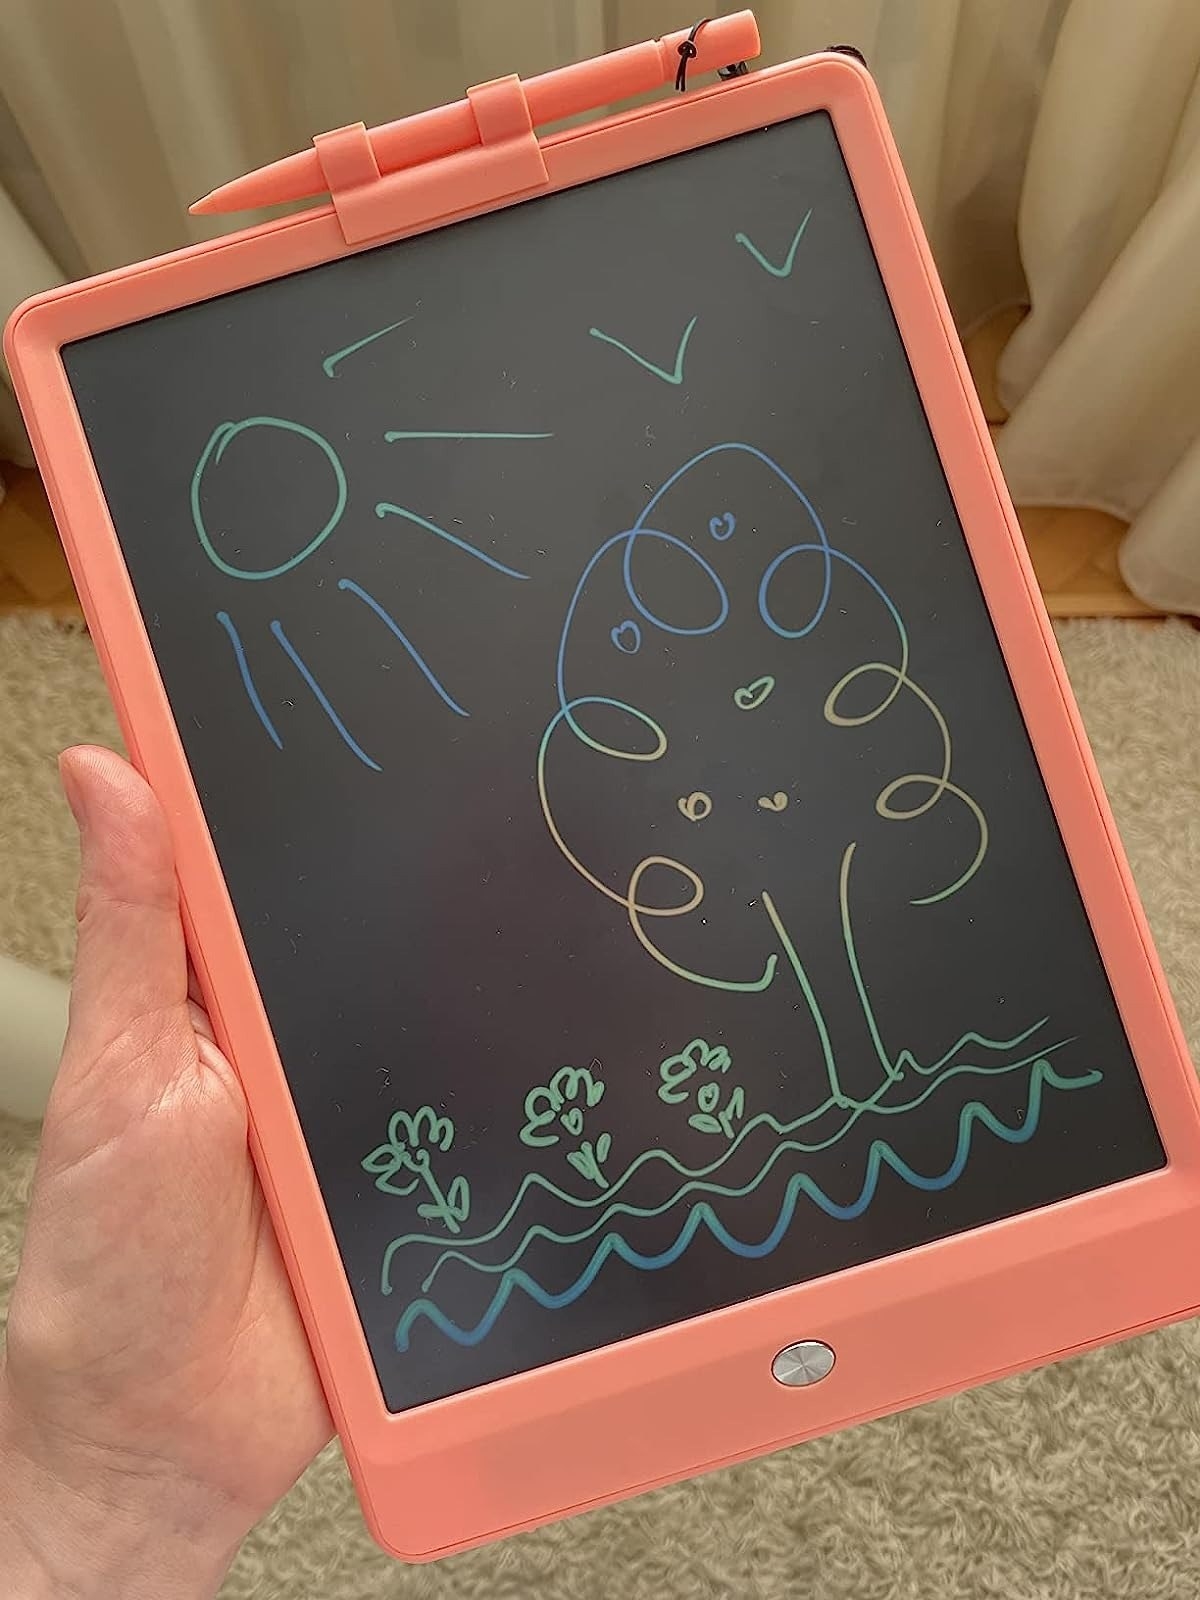 Writing tablet displays a drawing